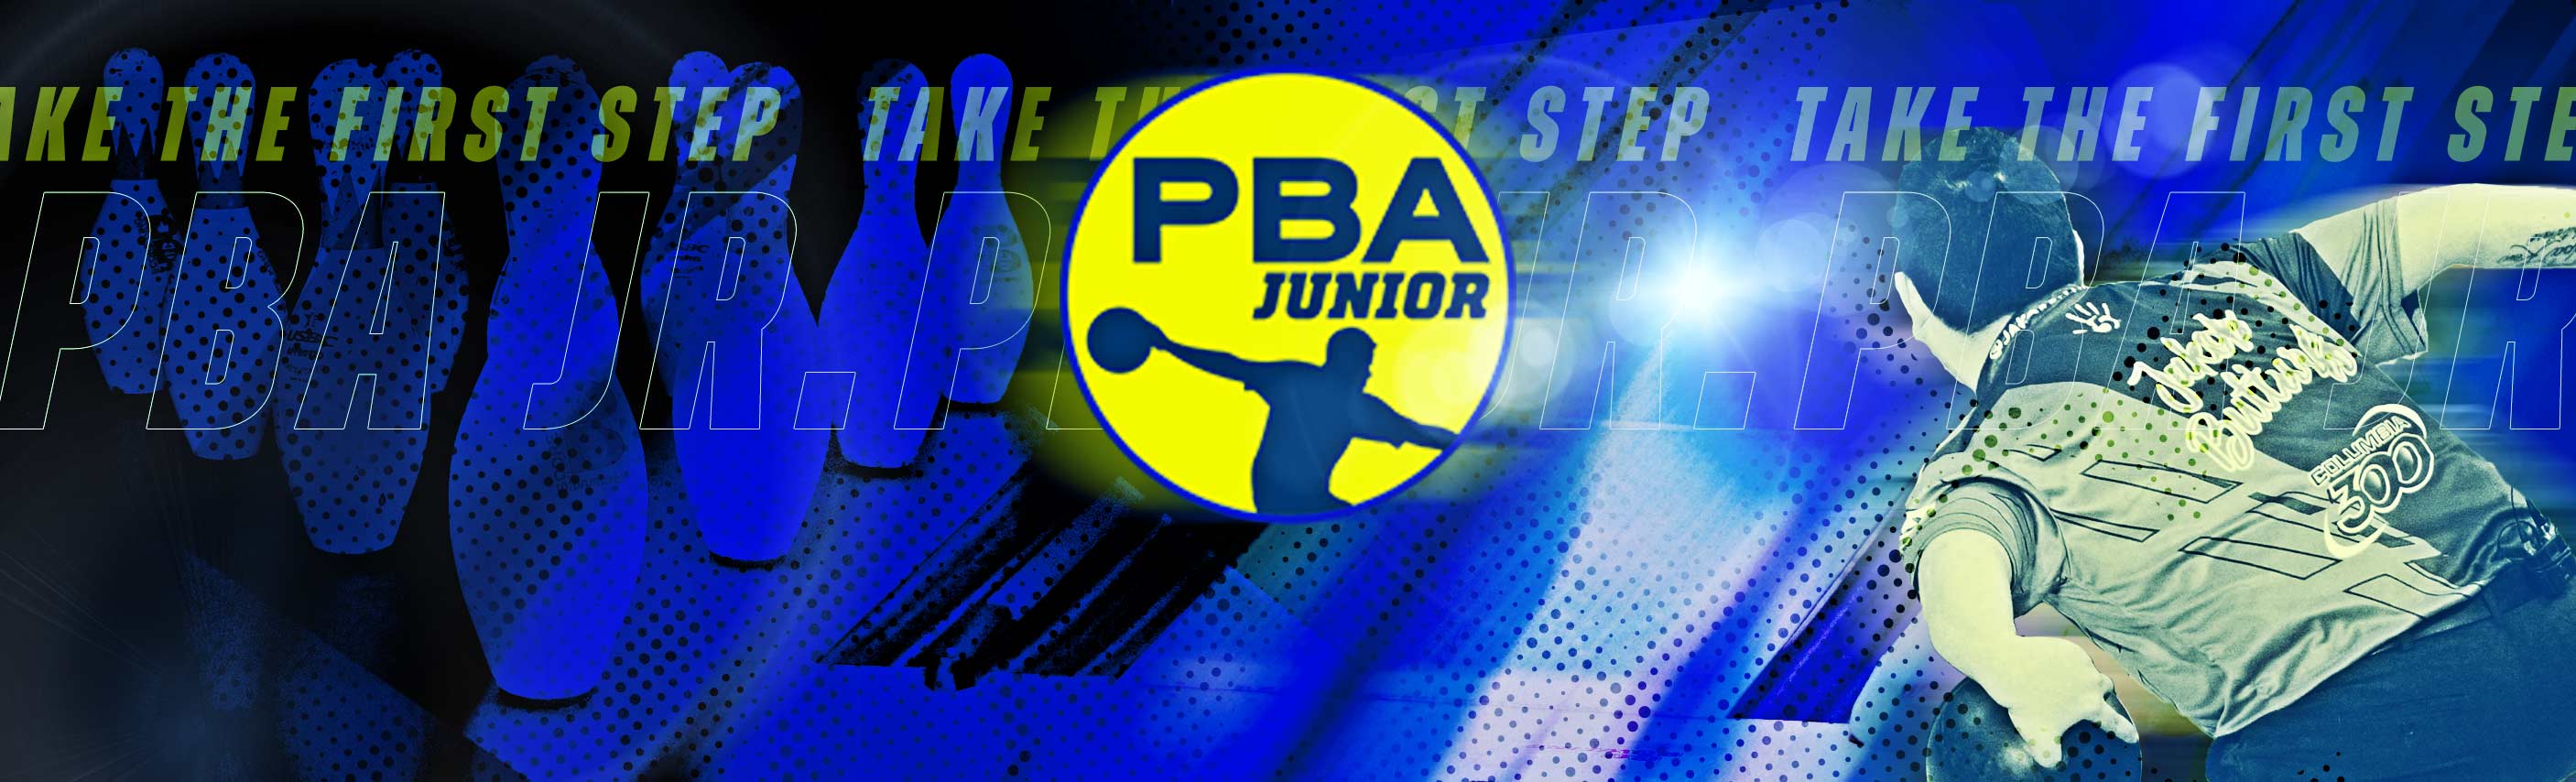 PBA Junior logo over a blue background with pins and a bowler taking a shot.